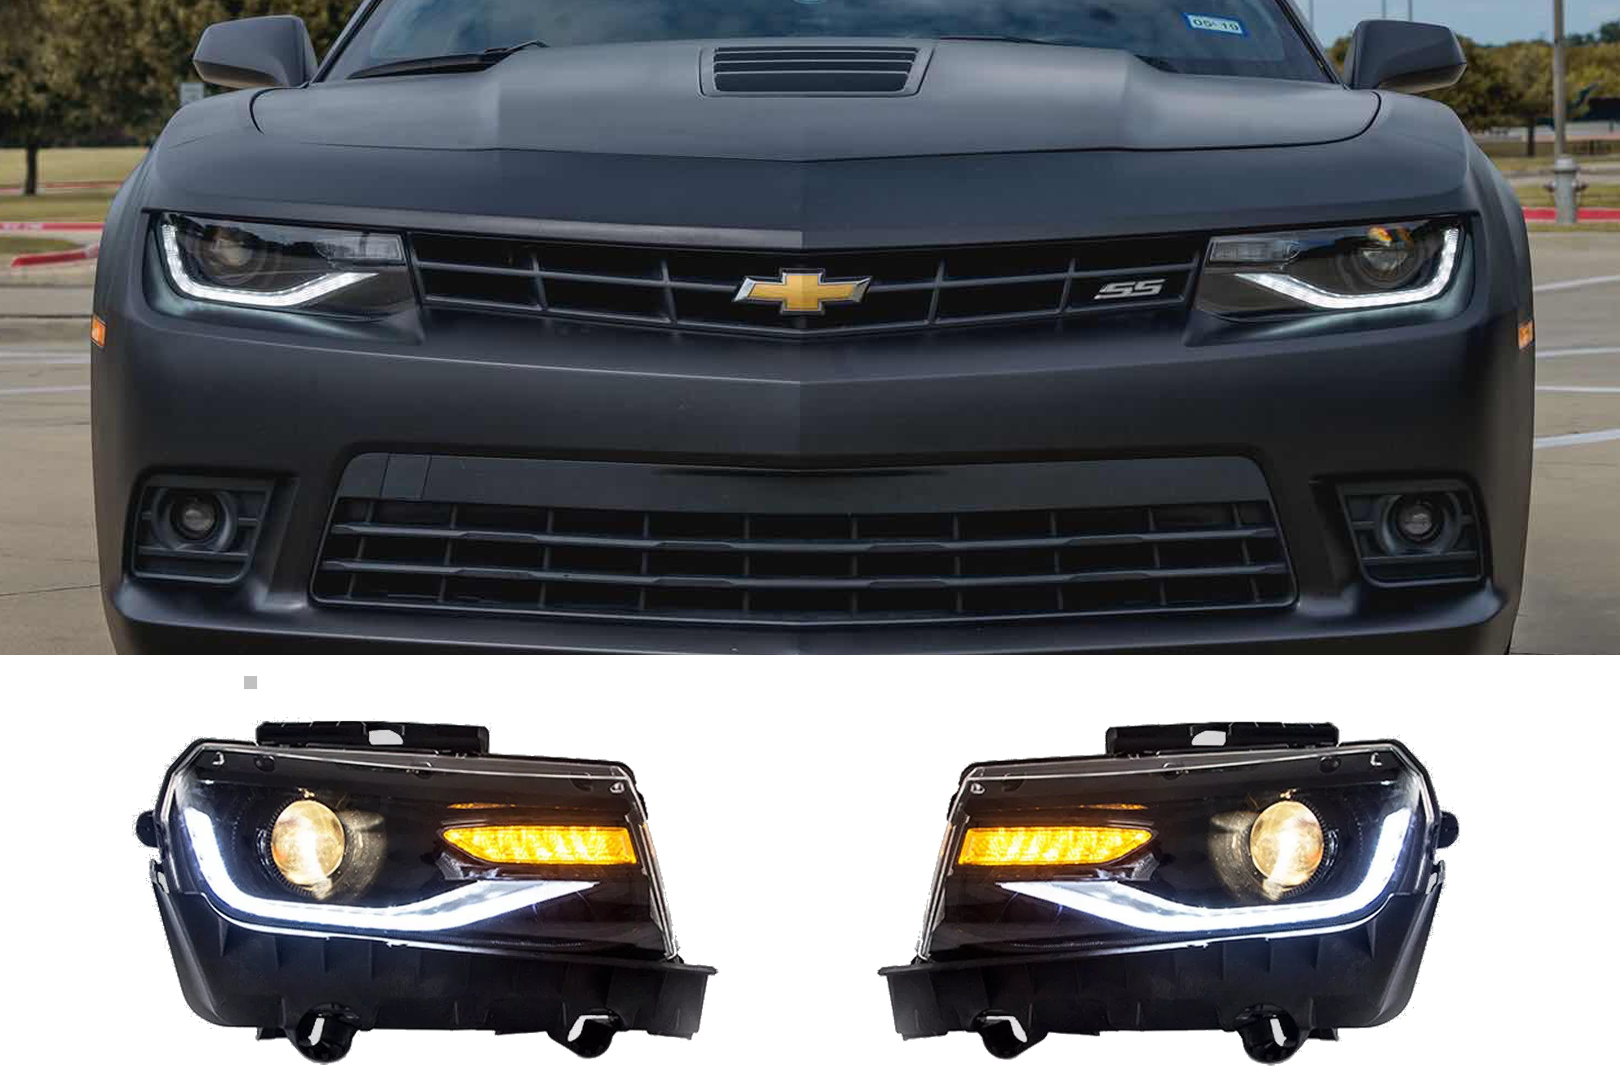 Not Included VLAND Headlight Fit for Chevrolet Camaro 2014-2015 LED Head Light.D2H/HID Bulb Conversion Kit for HI/ LO Beam.